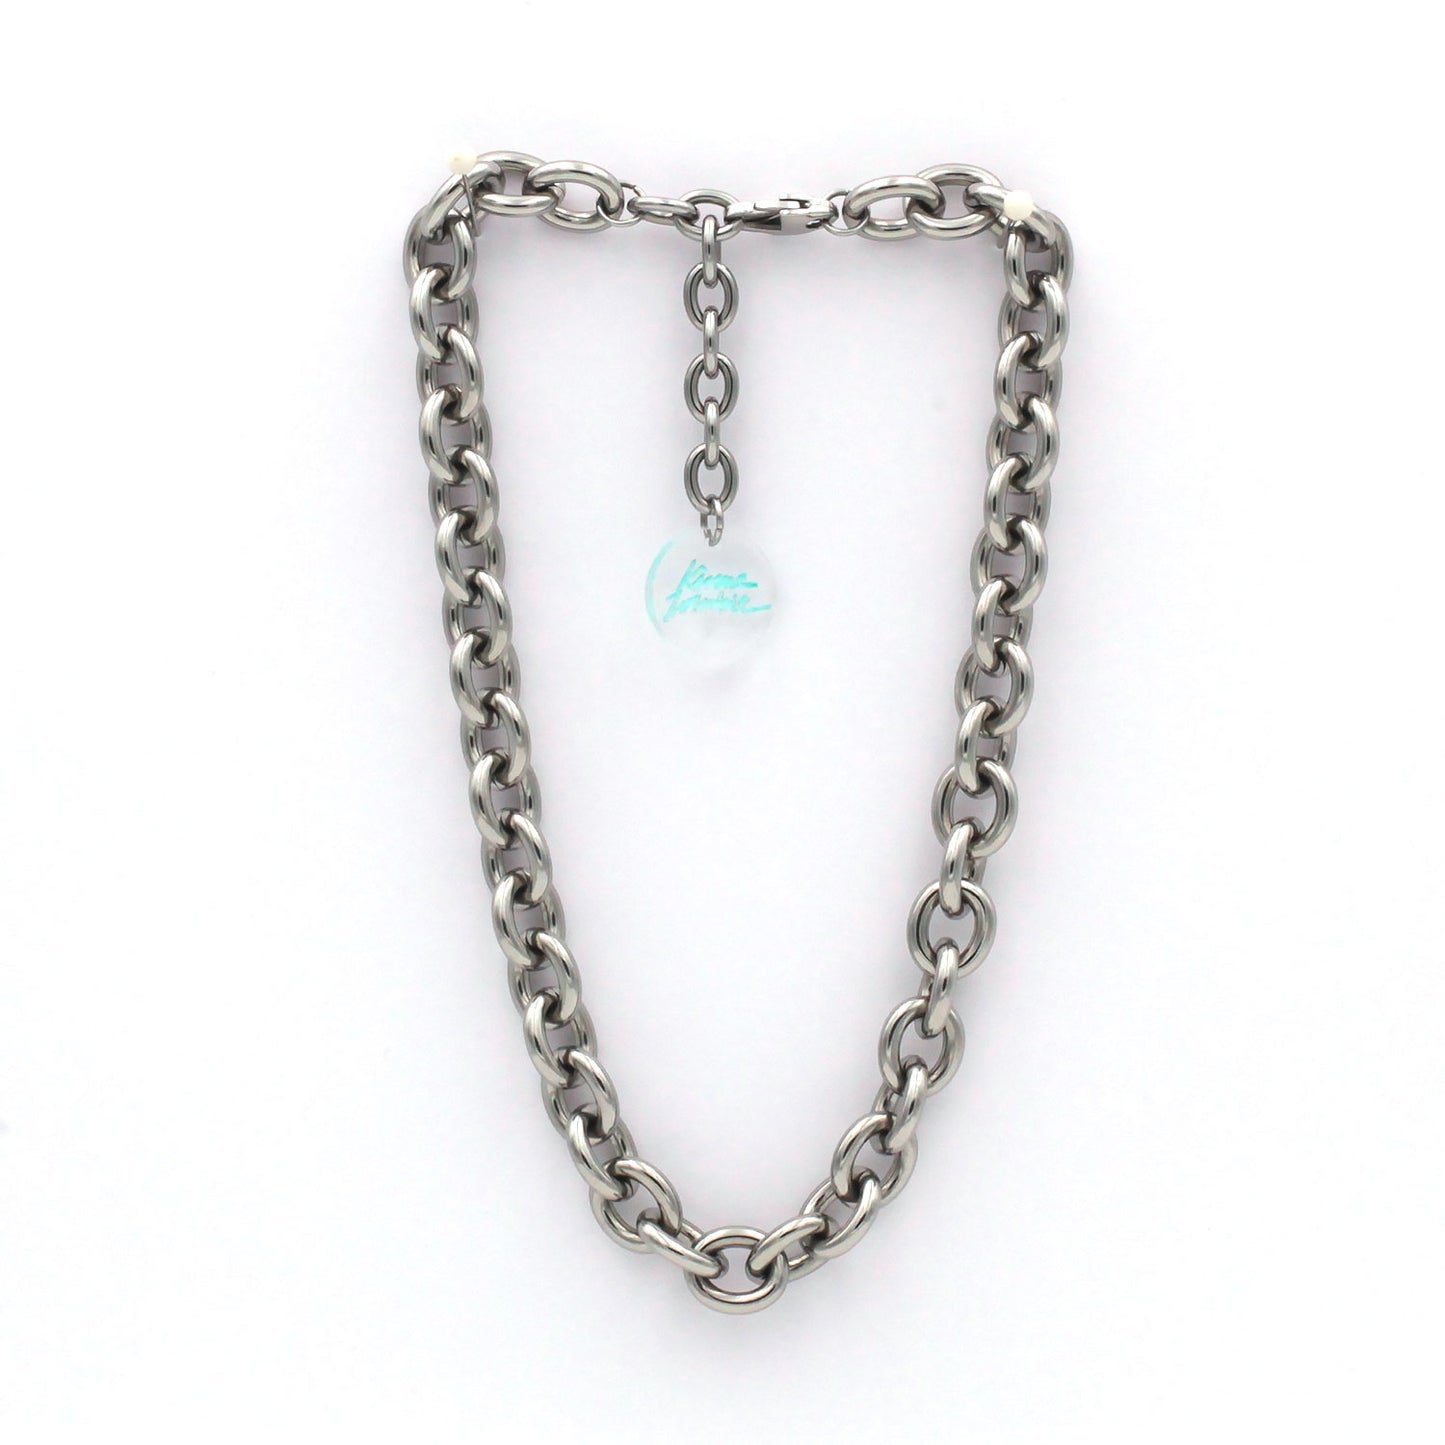 this is a picture of a massive link cable chain choker necklace hanging from a white background. there is an extender with a clear engraved medal with green signature logo. 